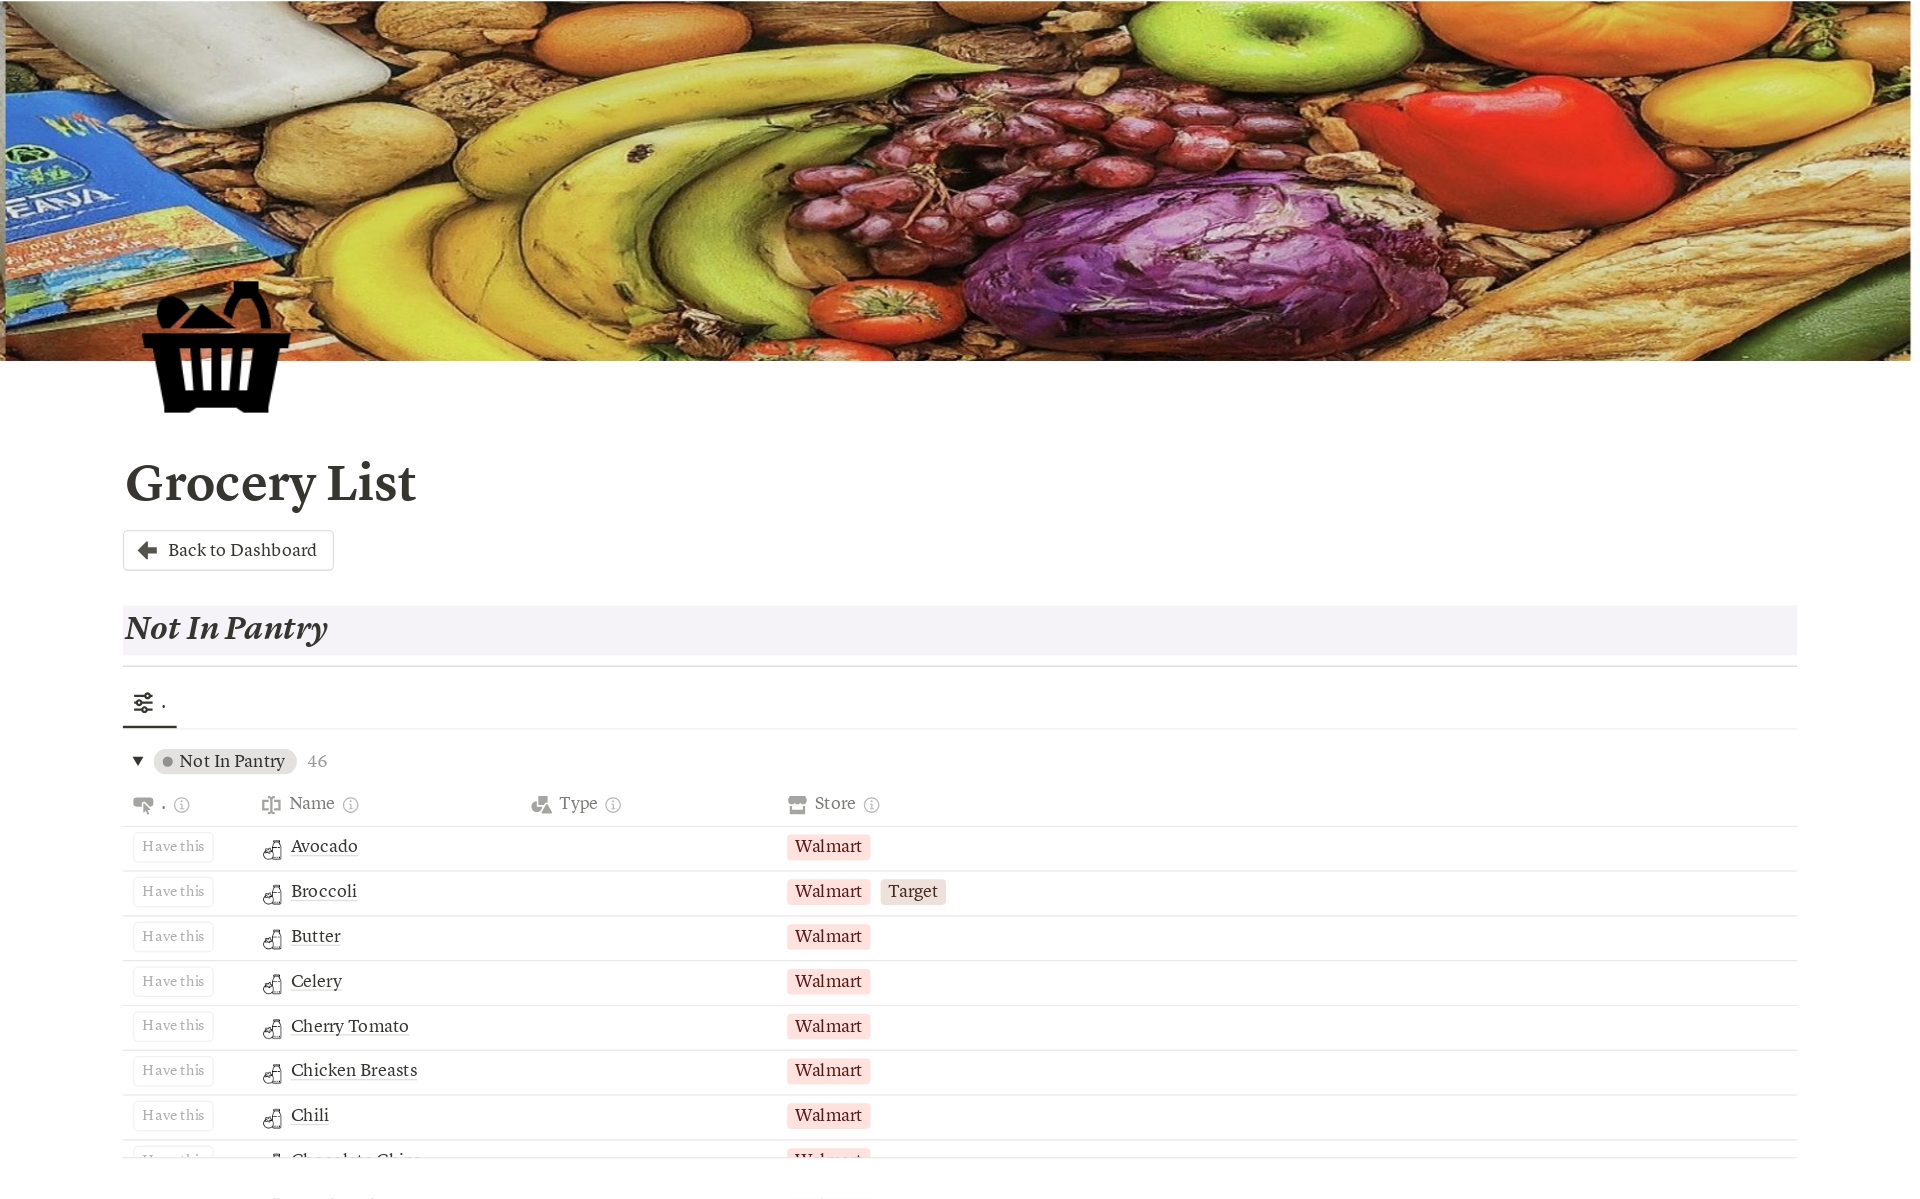 --> Meal Planner
--> Pantry
--> Grocery List
--> Recipes
--> Meal Planner Add-On Feature to Grocery List
--> Meals in Categories: Breakfast, Lunch, Dinner, Dessert
--> Pantry in Categories: Condiments, Dried Goods, Produce etc.
--> Recipe URL Source
--> Filter by Ingredients